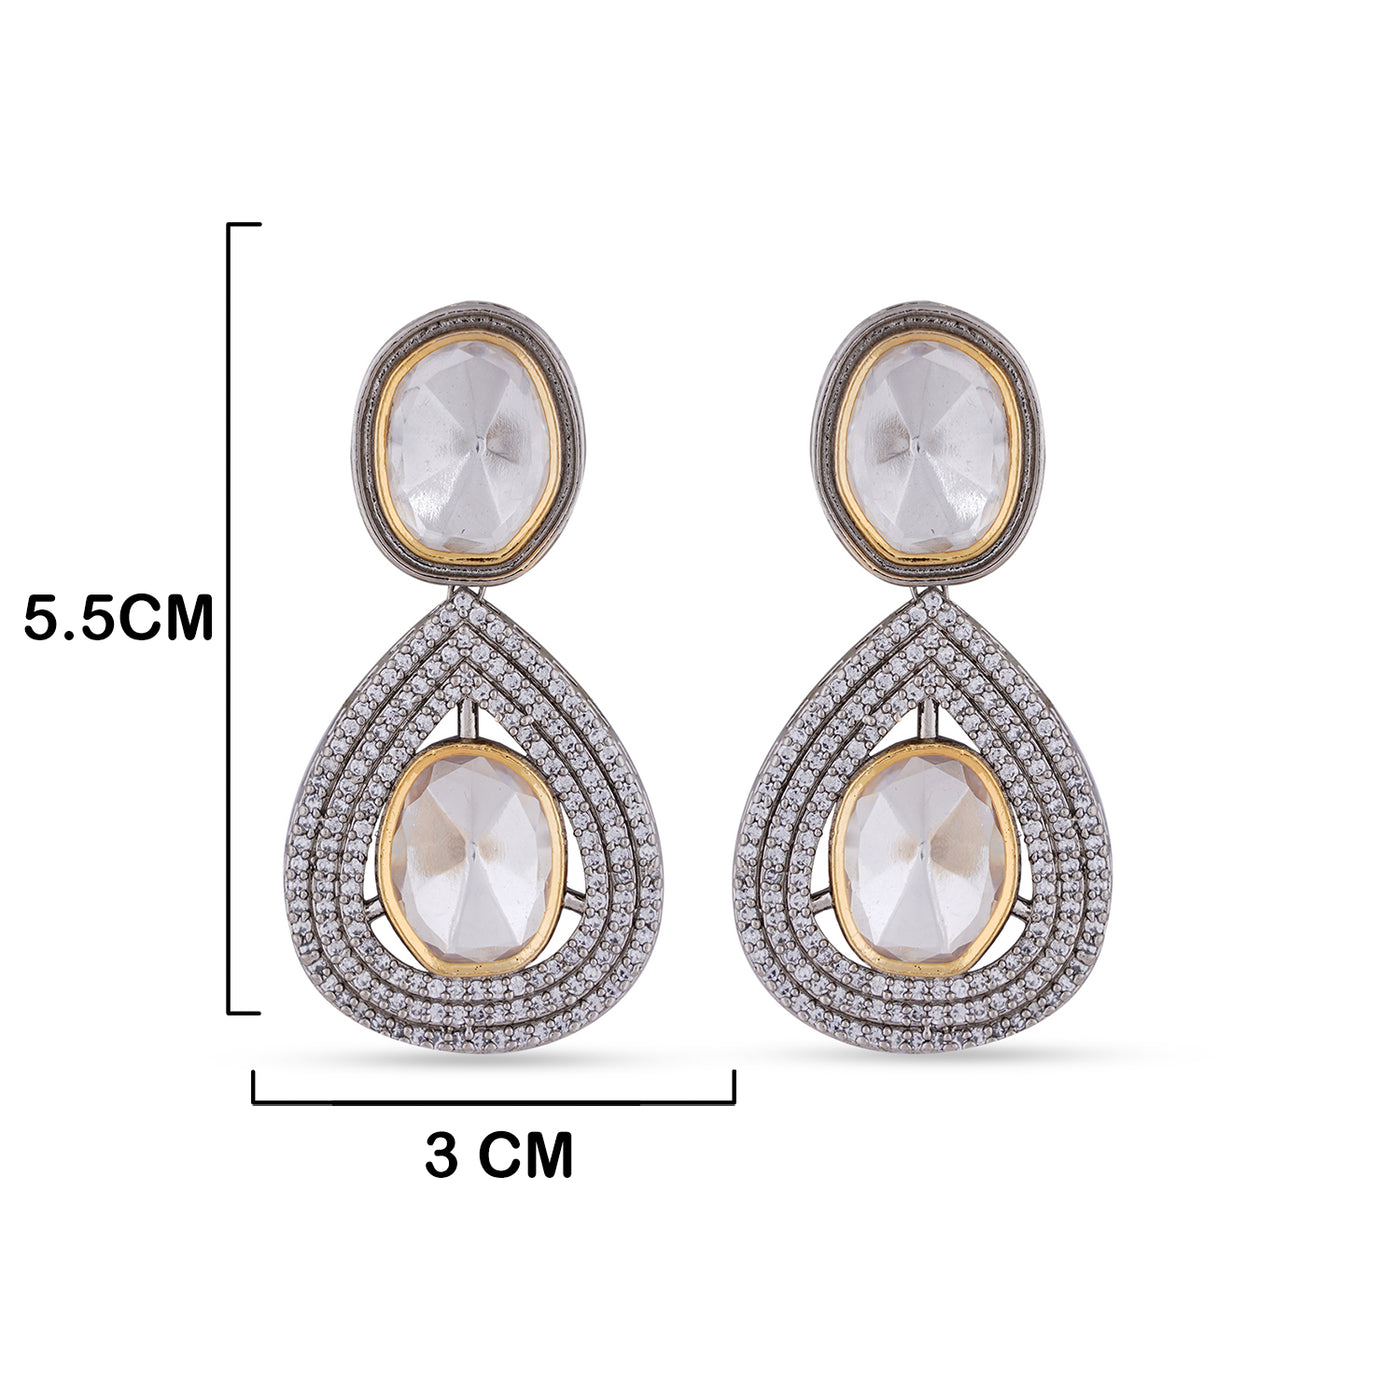 Cubic Zirconia Studded Kundan Earrings with measurements in cm. 5.5cm by 3cm. 